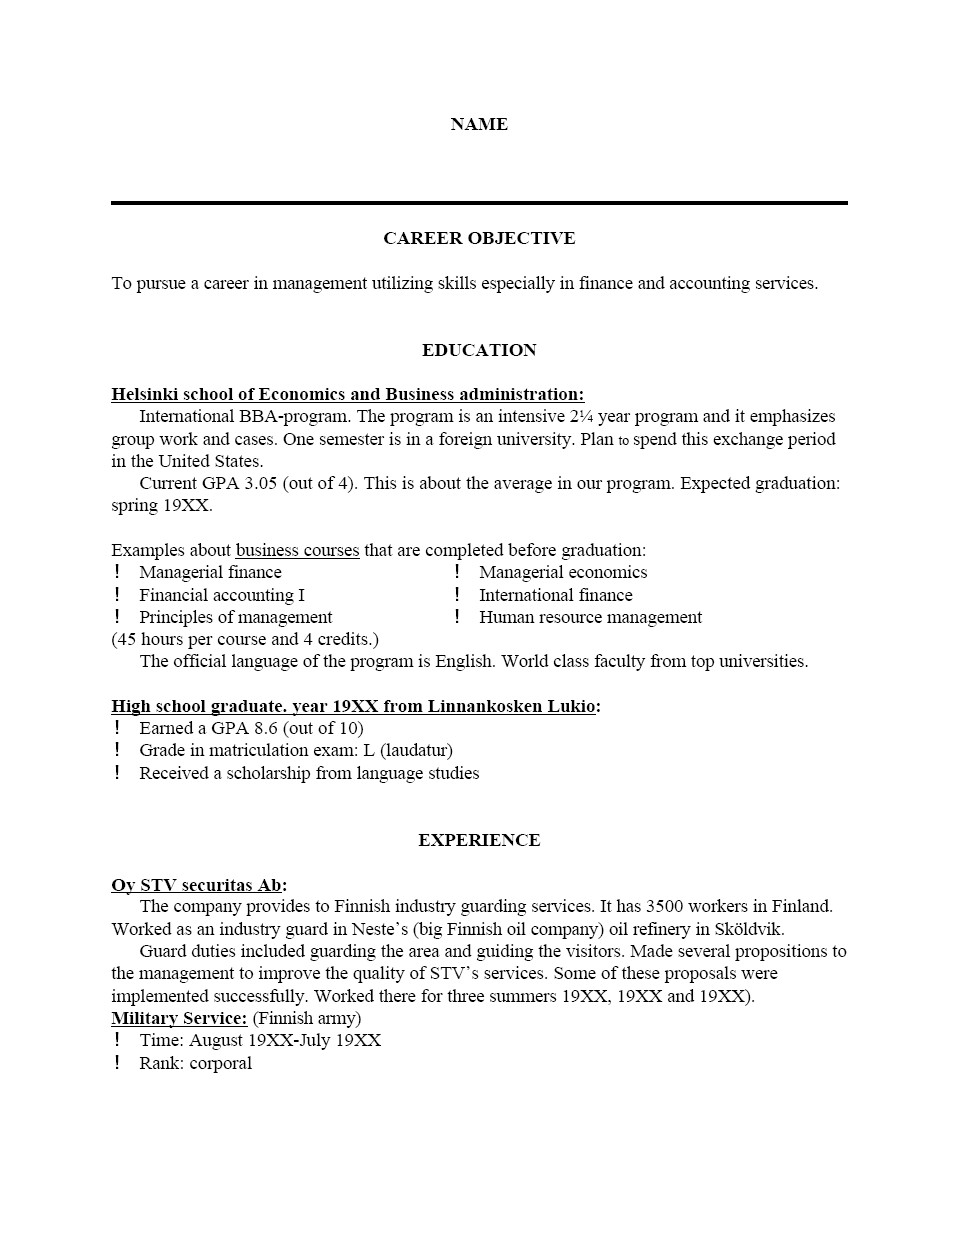 Free Sample Resume Templates Free Sample Resume Template Cover Letter and Resume